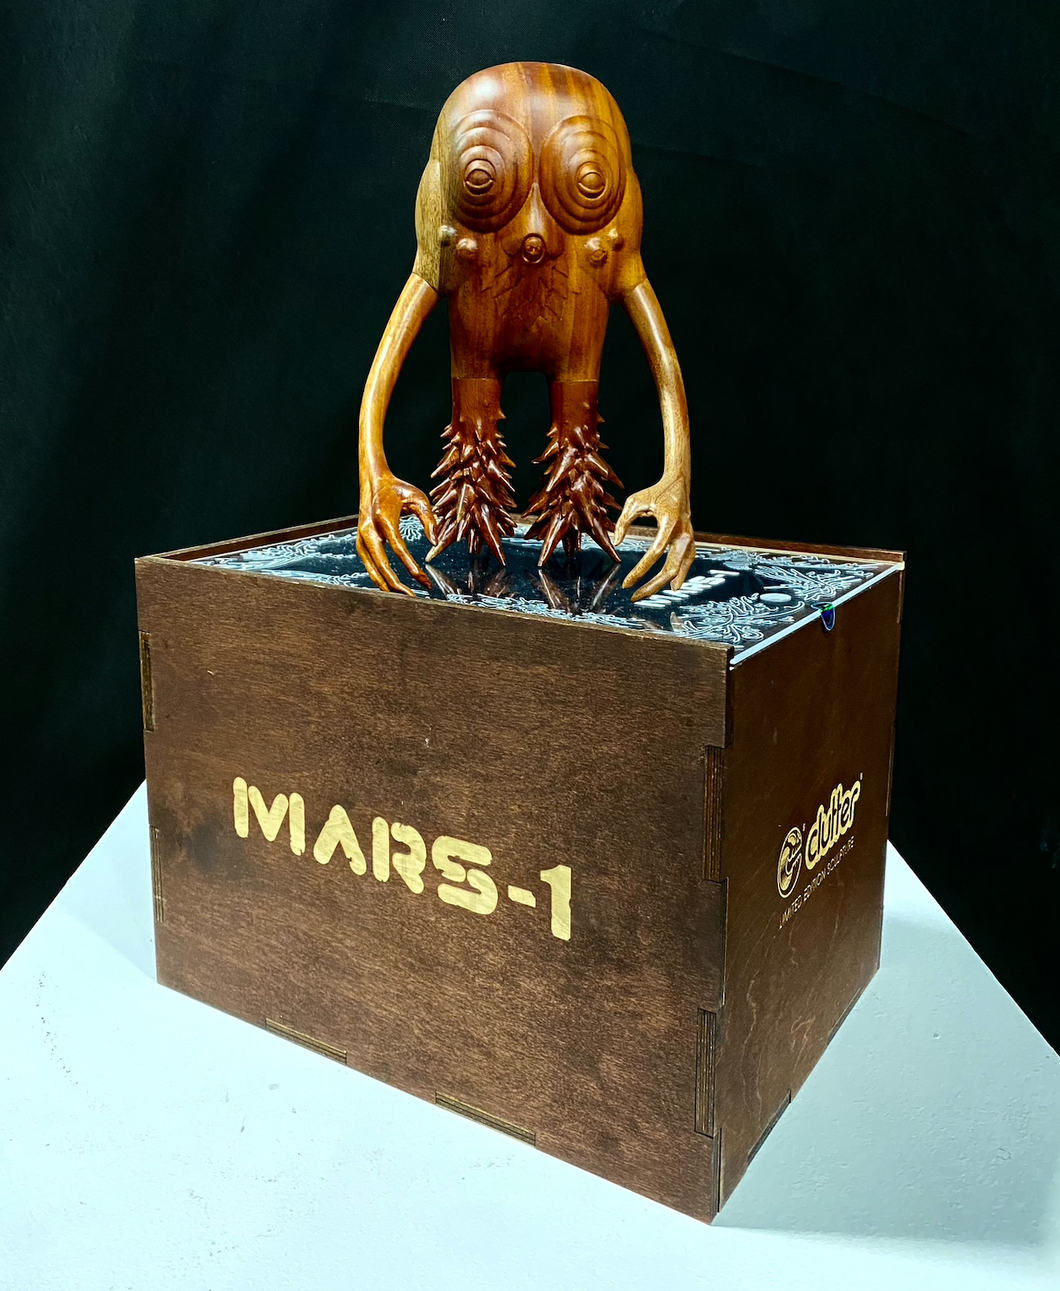 WOODEN ELECTRIC MONKEY MAN SCULPTURE BY MARS-1